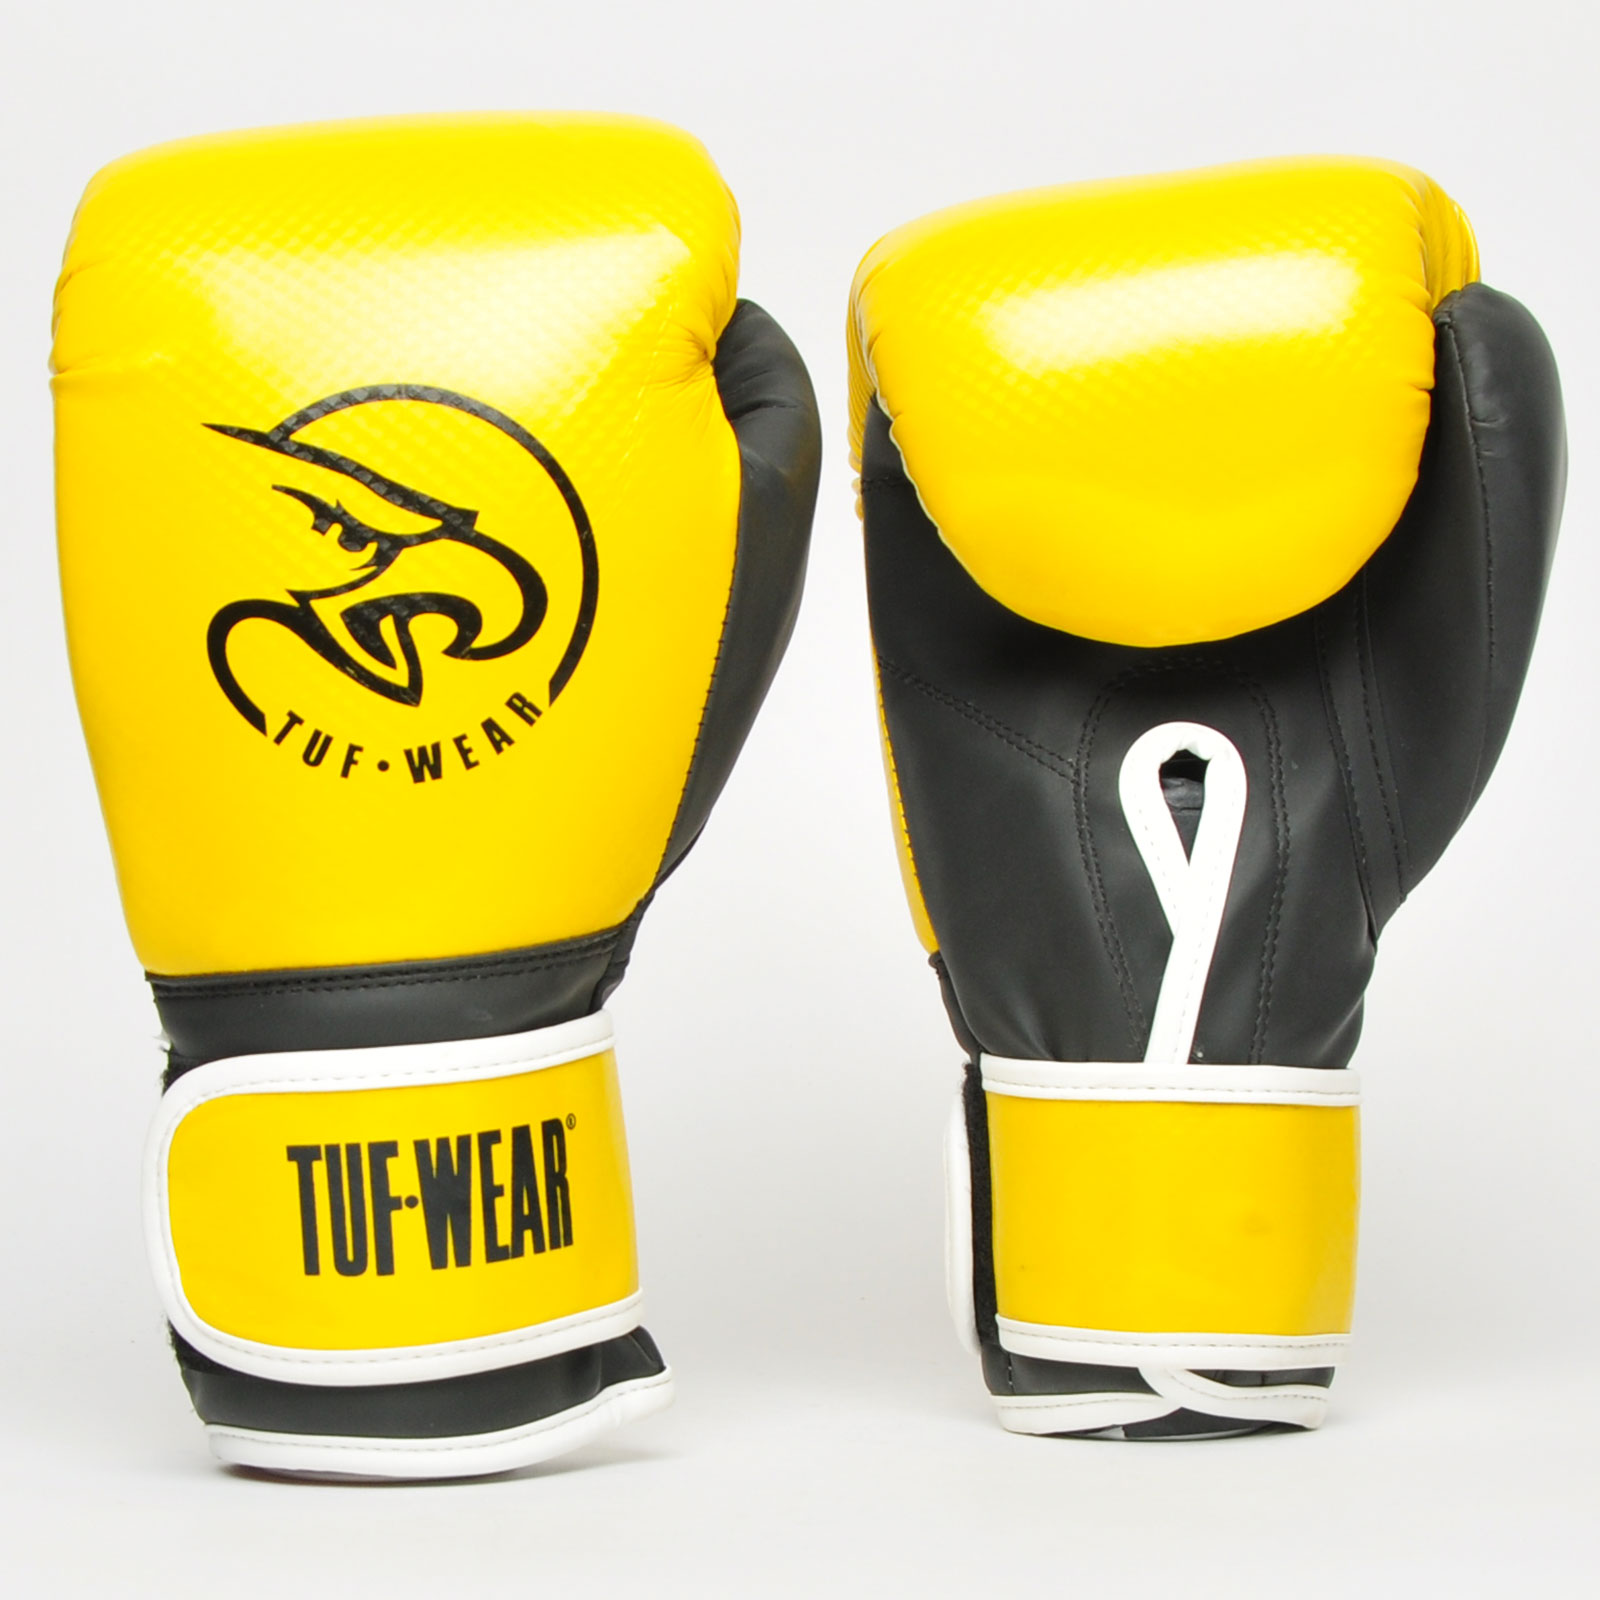 Tuf Wear Training Gloves Victor Synthetic Leather Sparring Boxing Gloves 